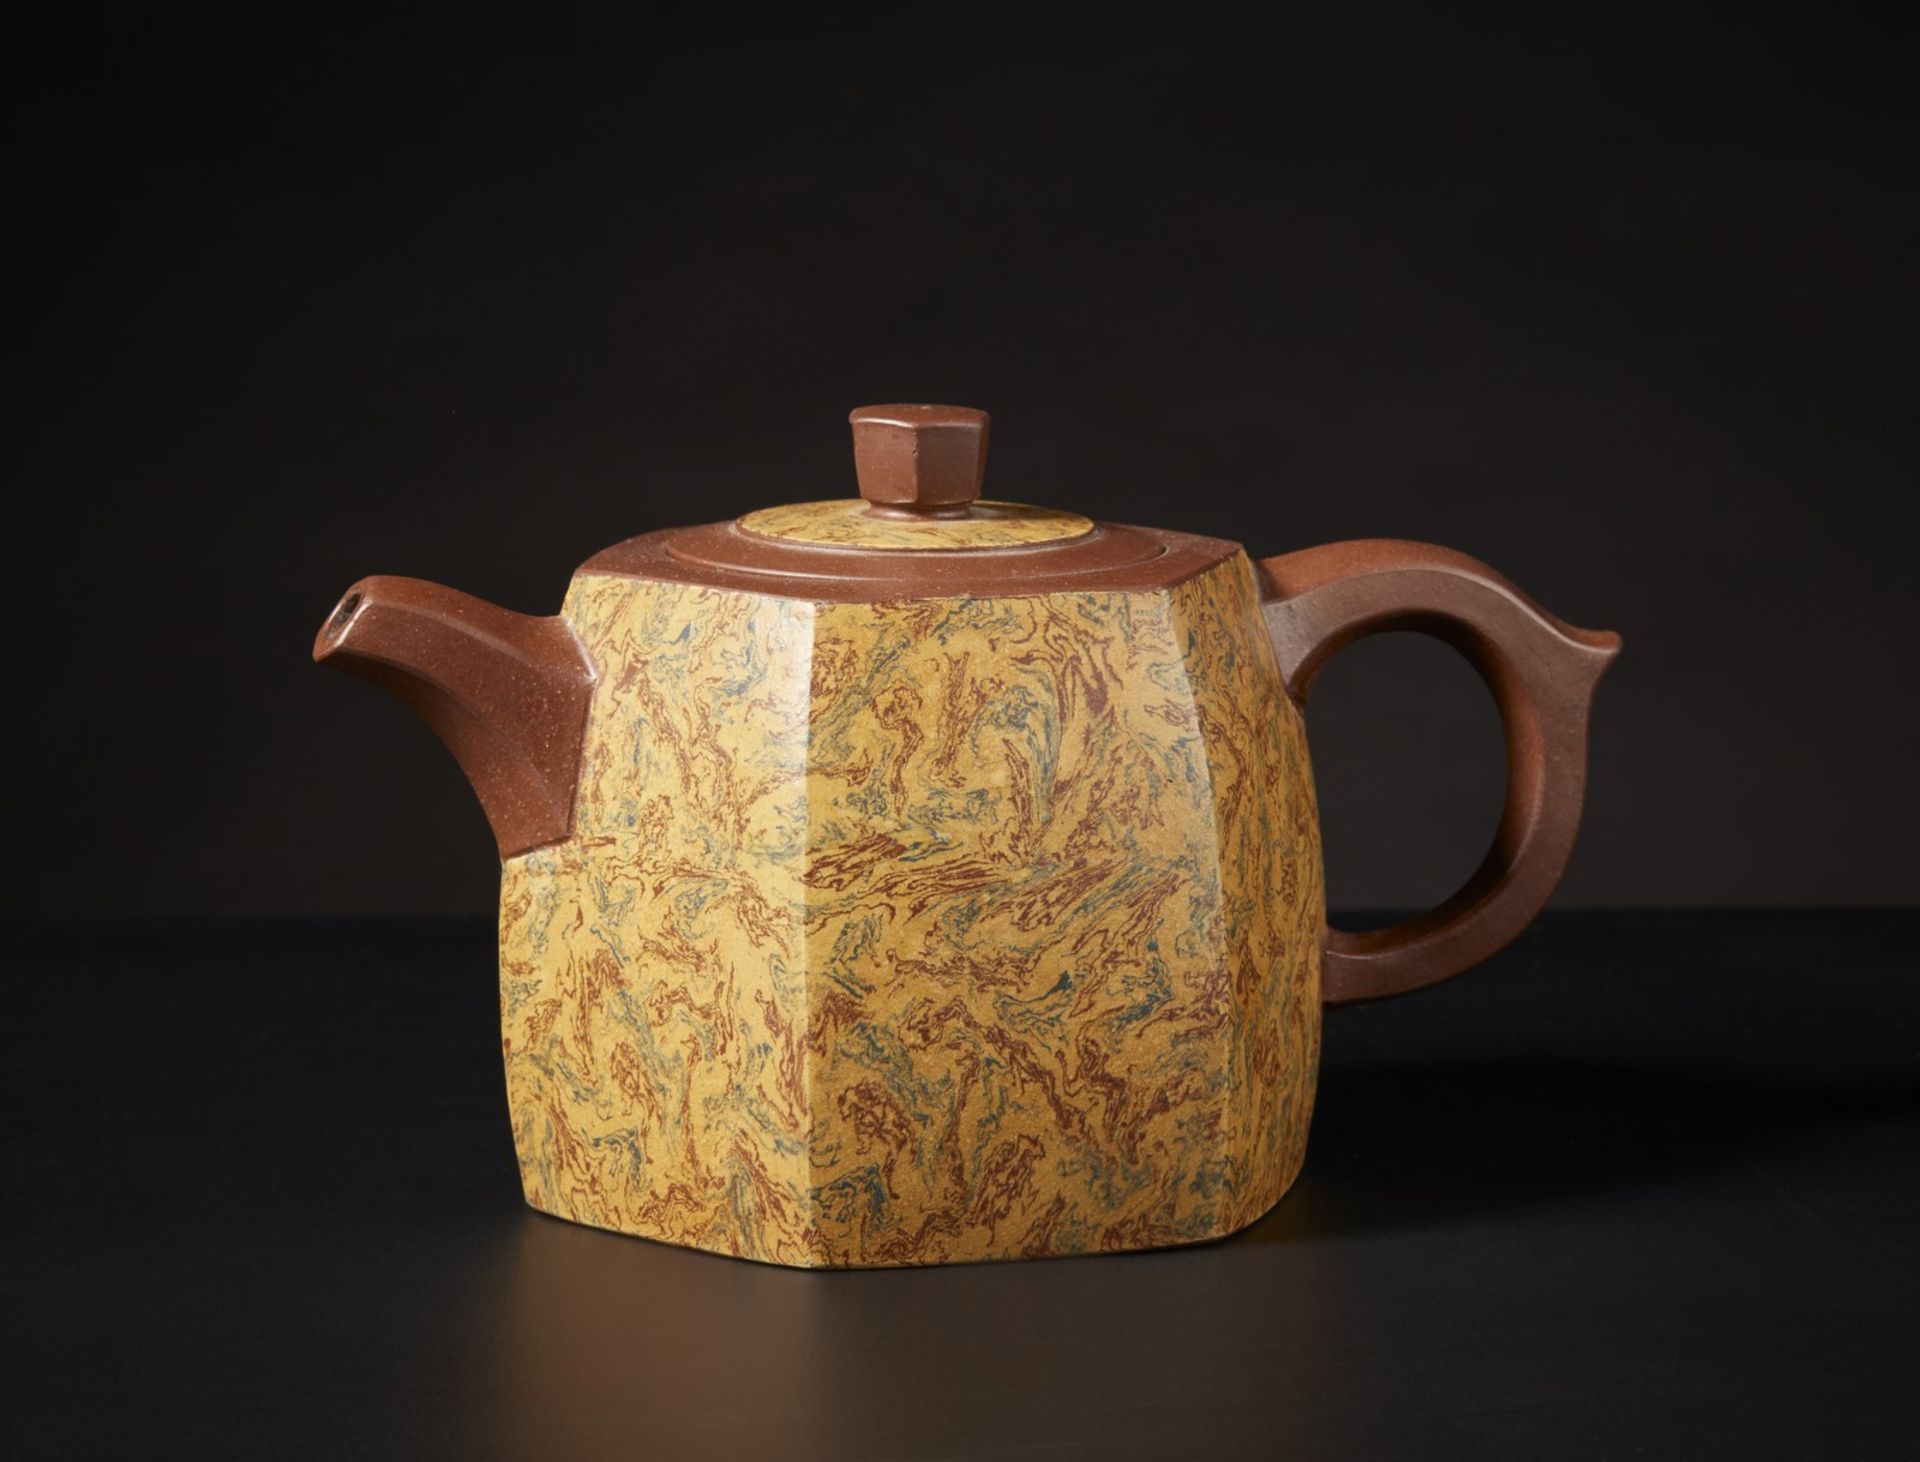 Arte Cinese  An Yixing teapot with marbled decorationChina, 20th century .